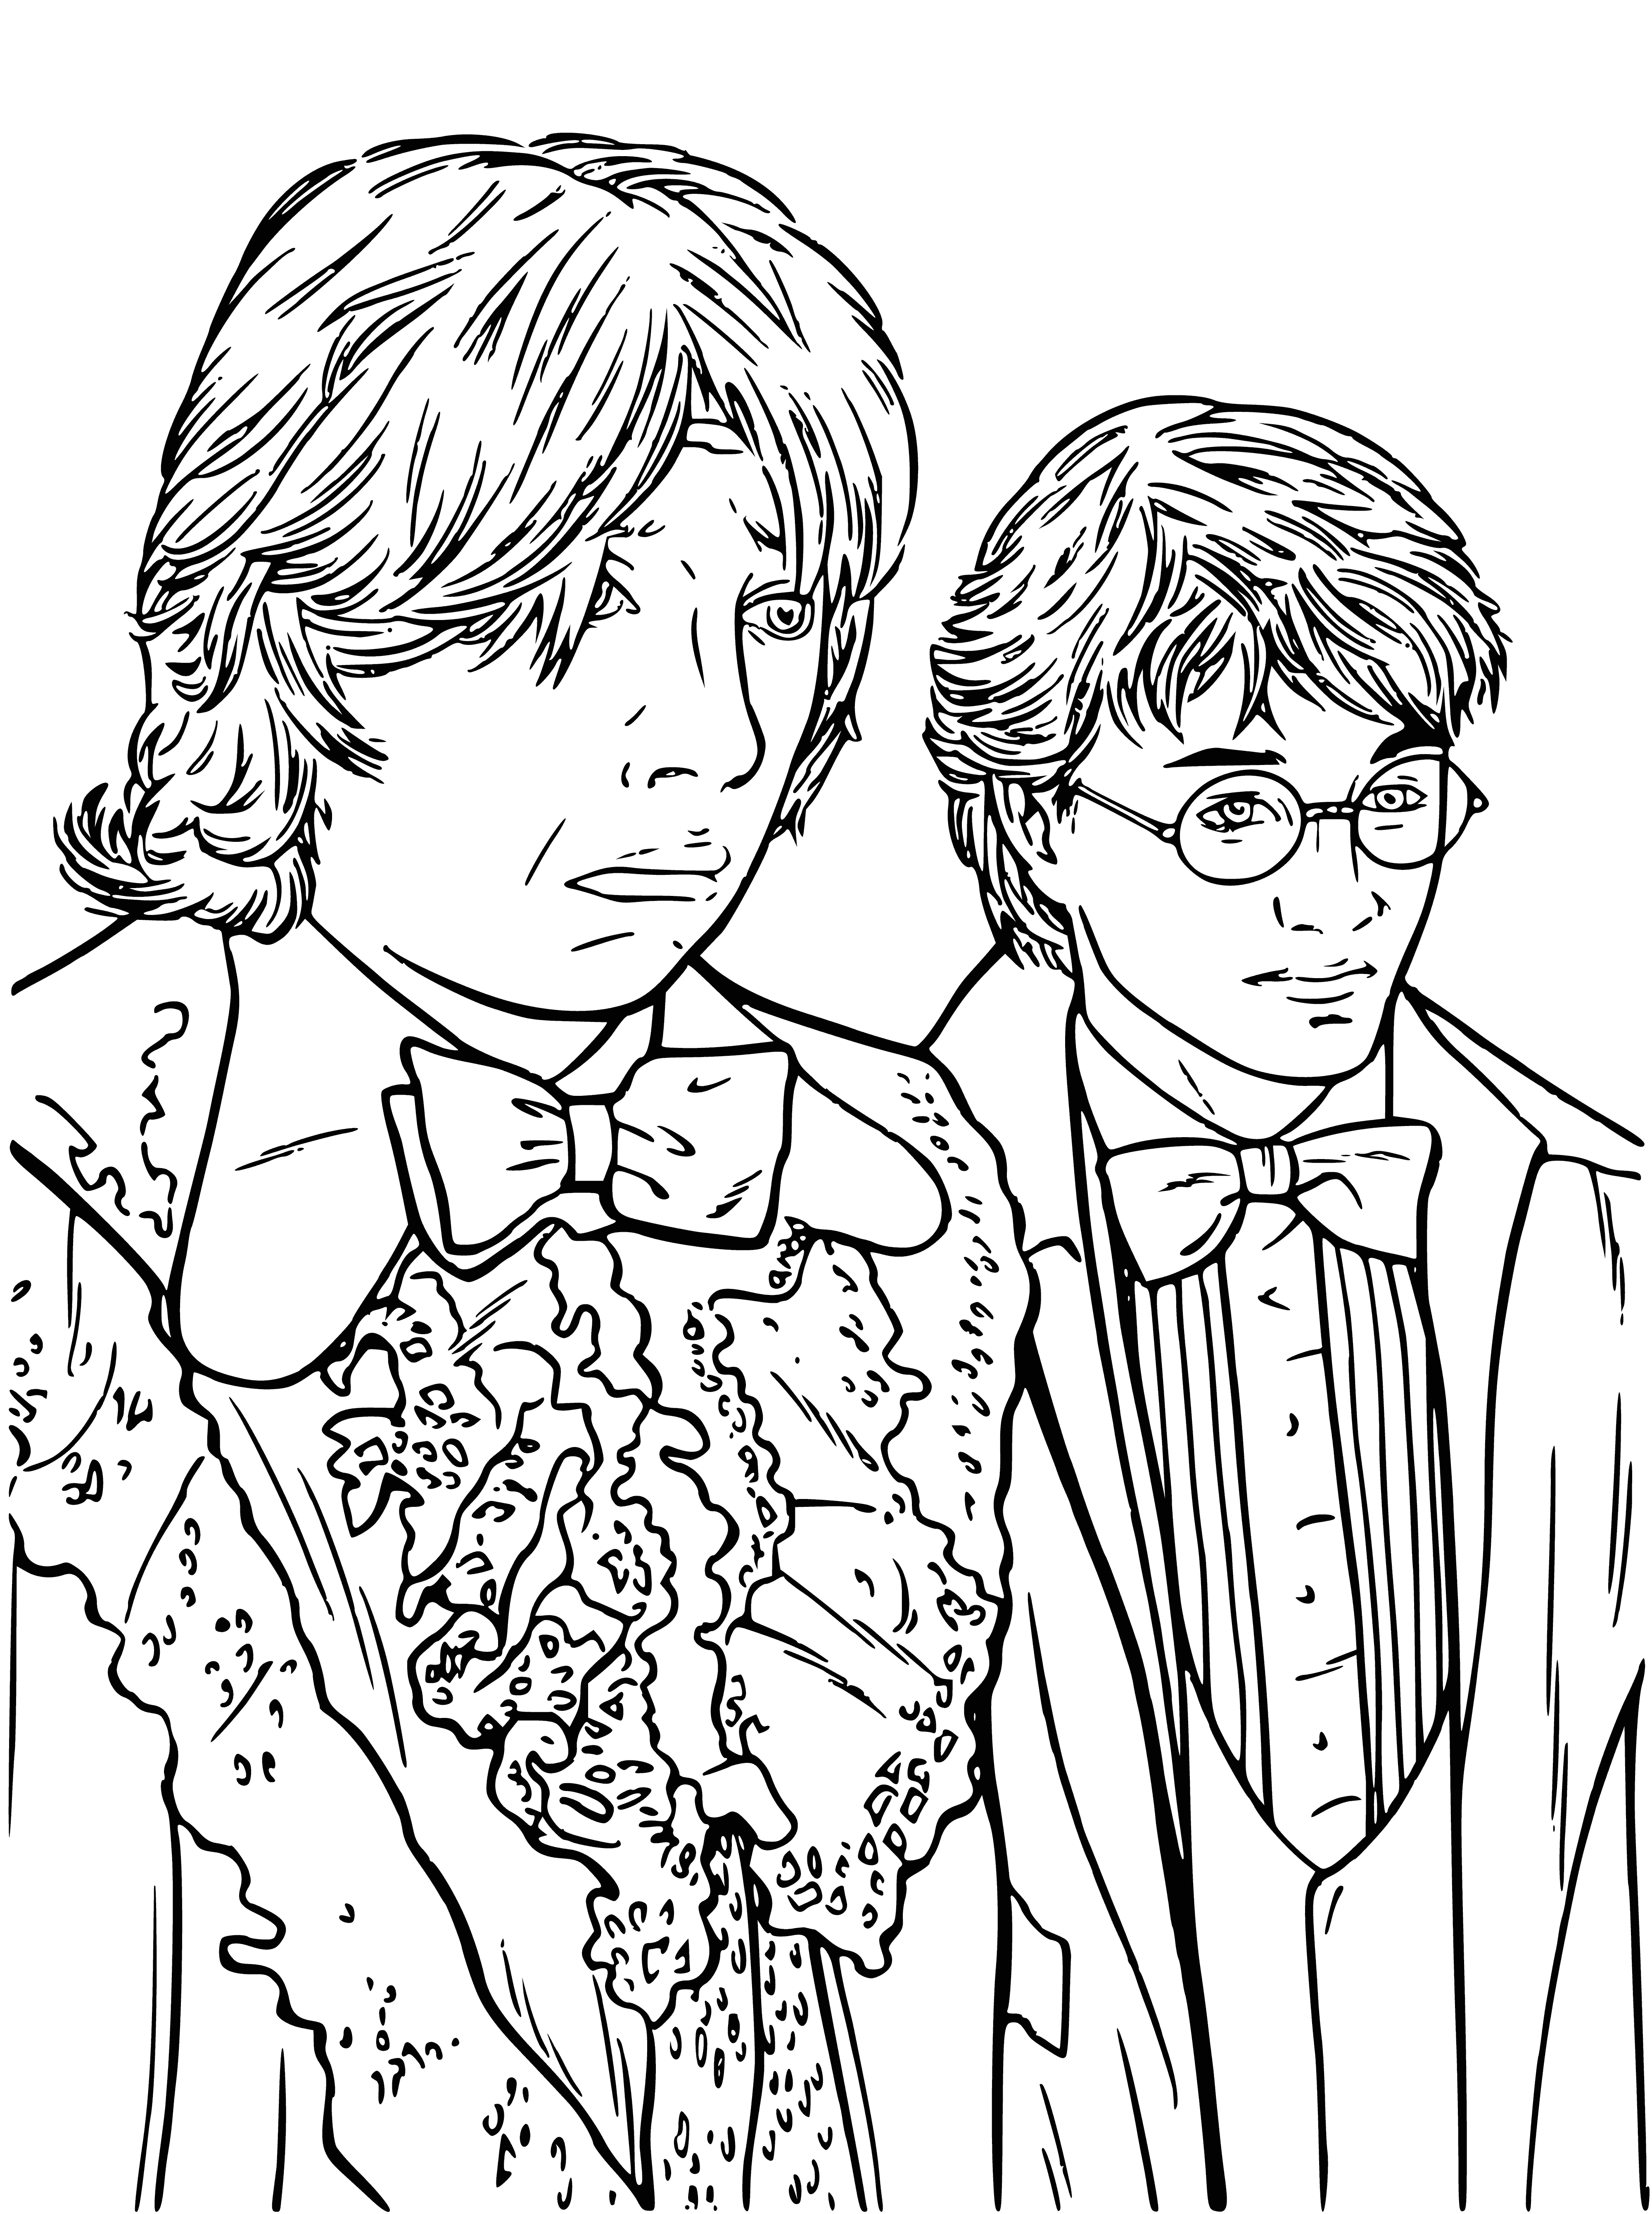 coloring page: Harry & Ron arm-in-arm in suits & ties walk down a hallway, ready for a formal event.